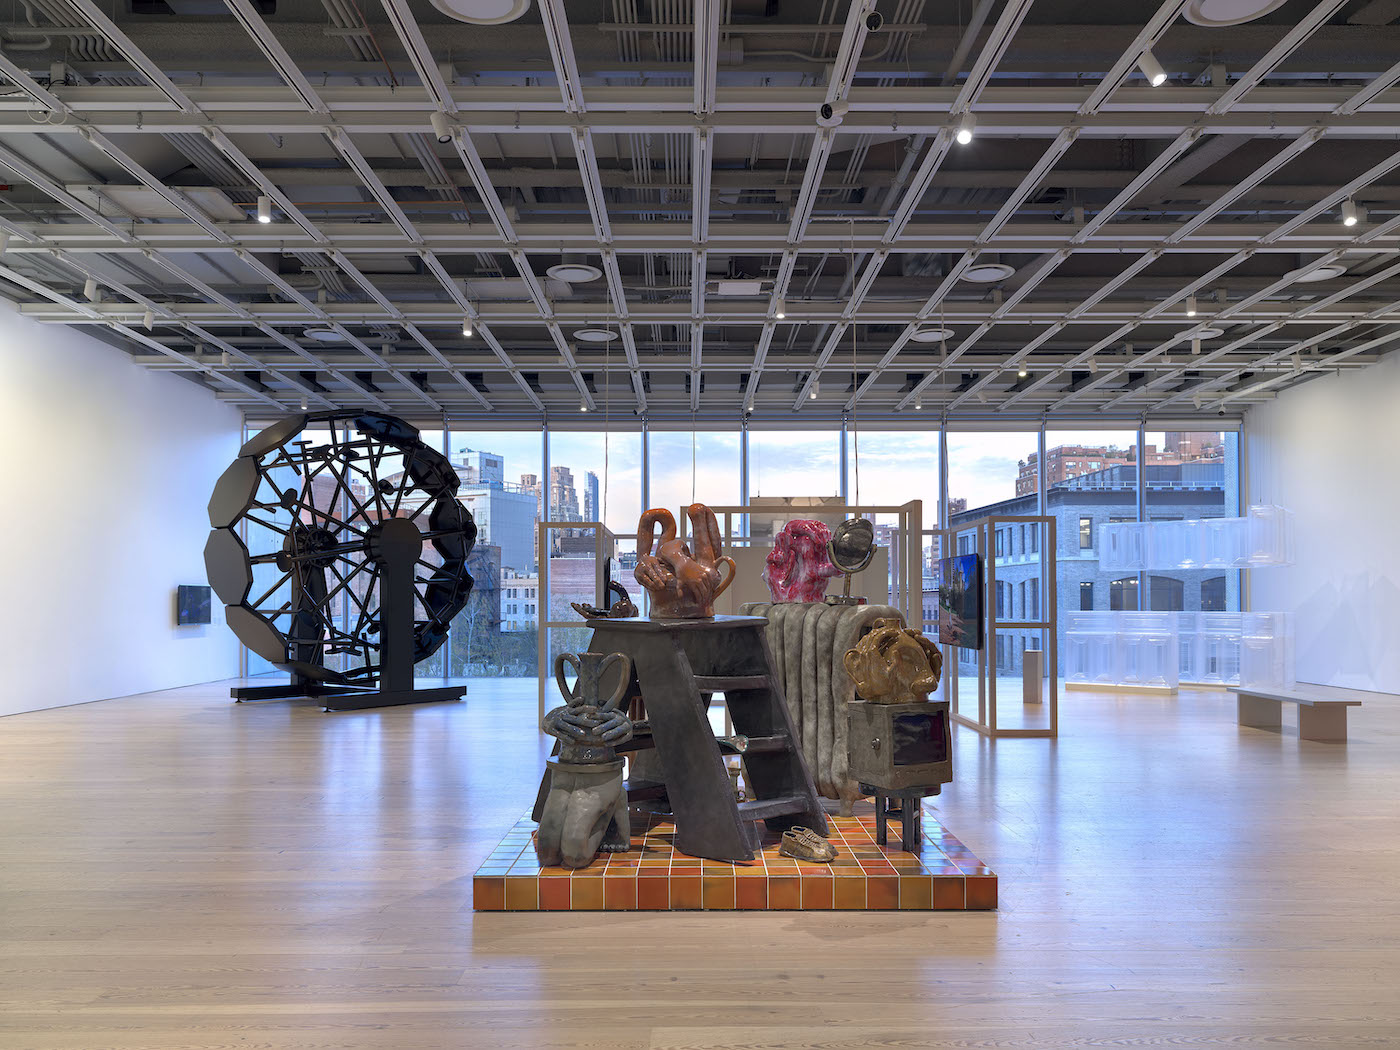 Installation view of Whitney Biennial 2022: Quiet as It’s Kept (Whitney Museum of American Art, New York, April 6- September 5, 2022). From left to right: Sable Elyse Smith, A Clockwork, 2021; Woody De Othello, The will to make things happen, 2021; Emily Barker, Kitchen, 2019. Photograph by Ron Amstutz.